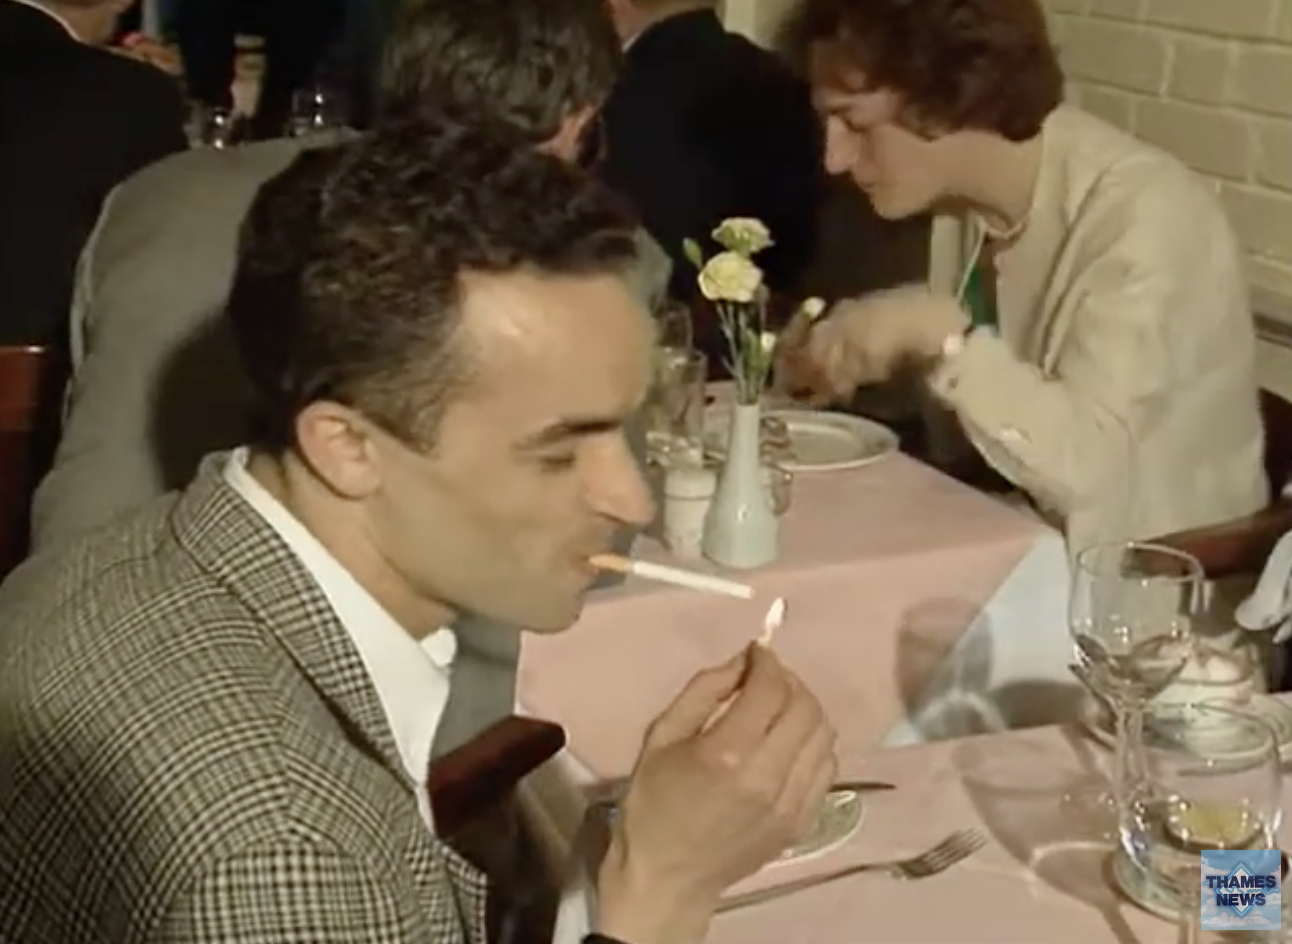 Man in a checkered jacket lighting a cigarette at a restaurant, with another patron in the background